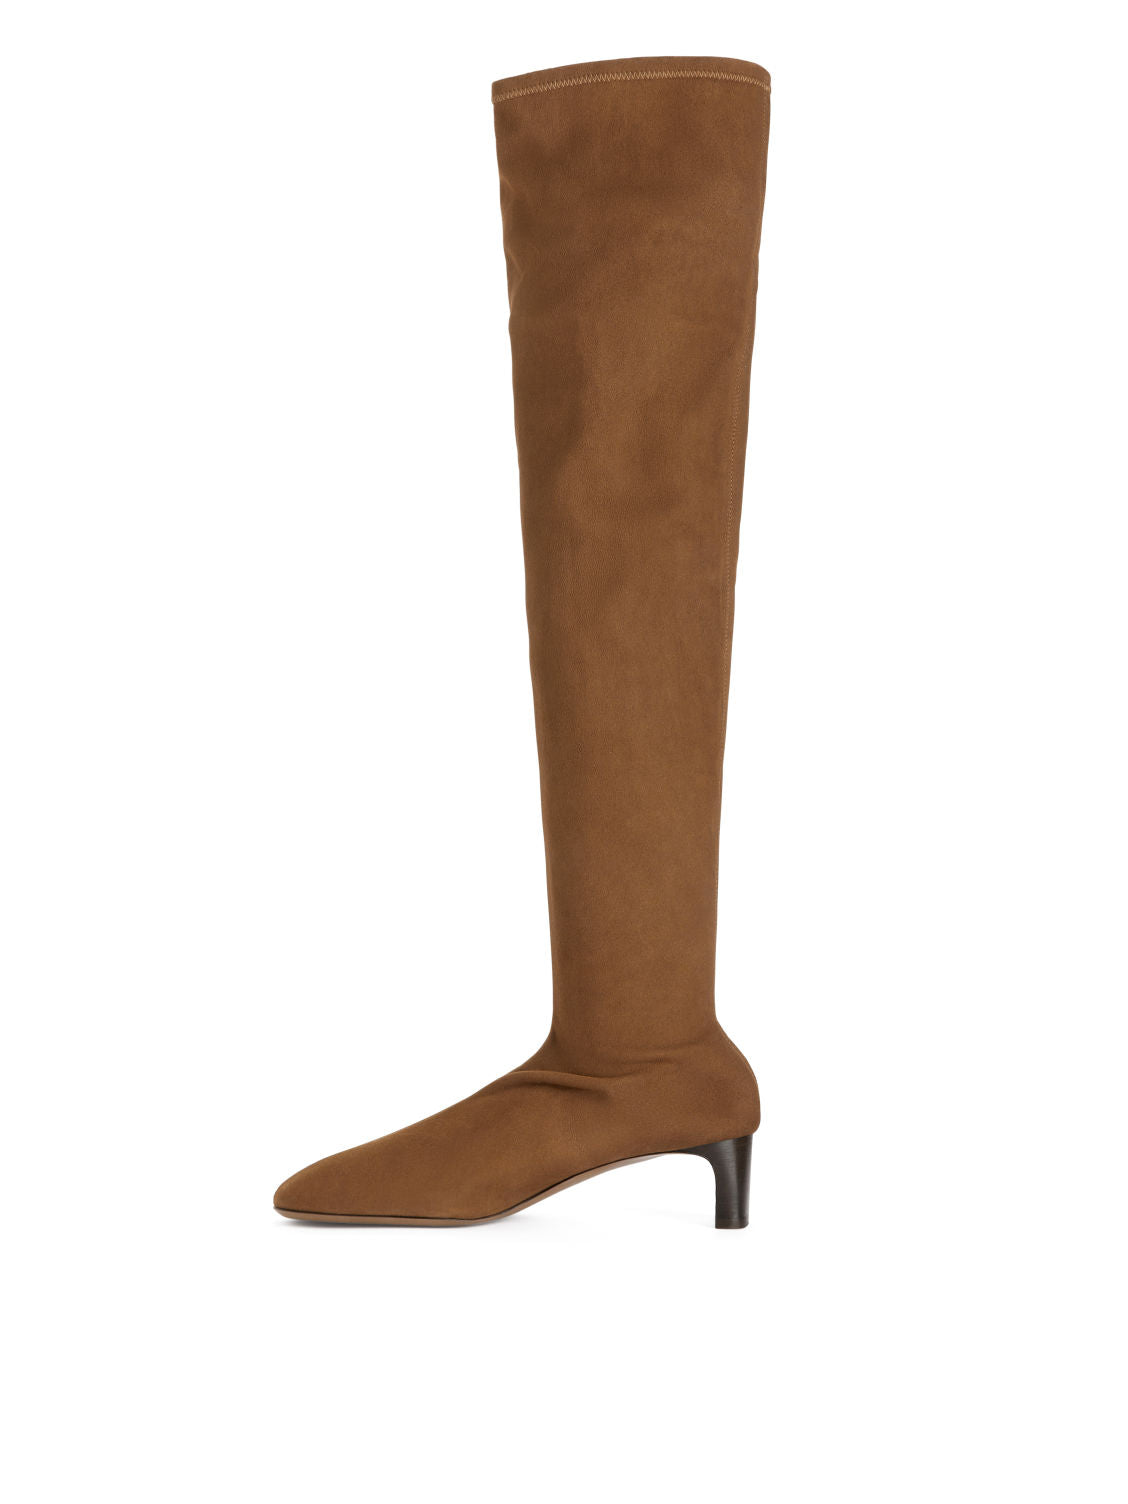 Suede over-knee boots